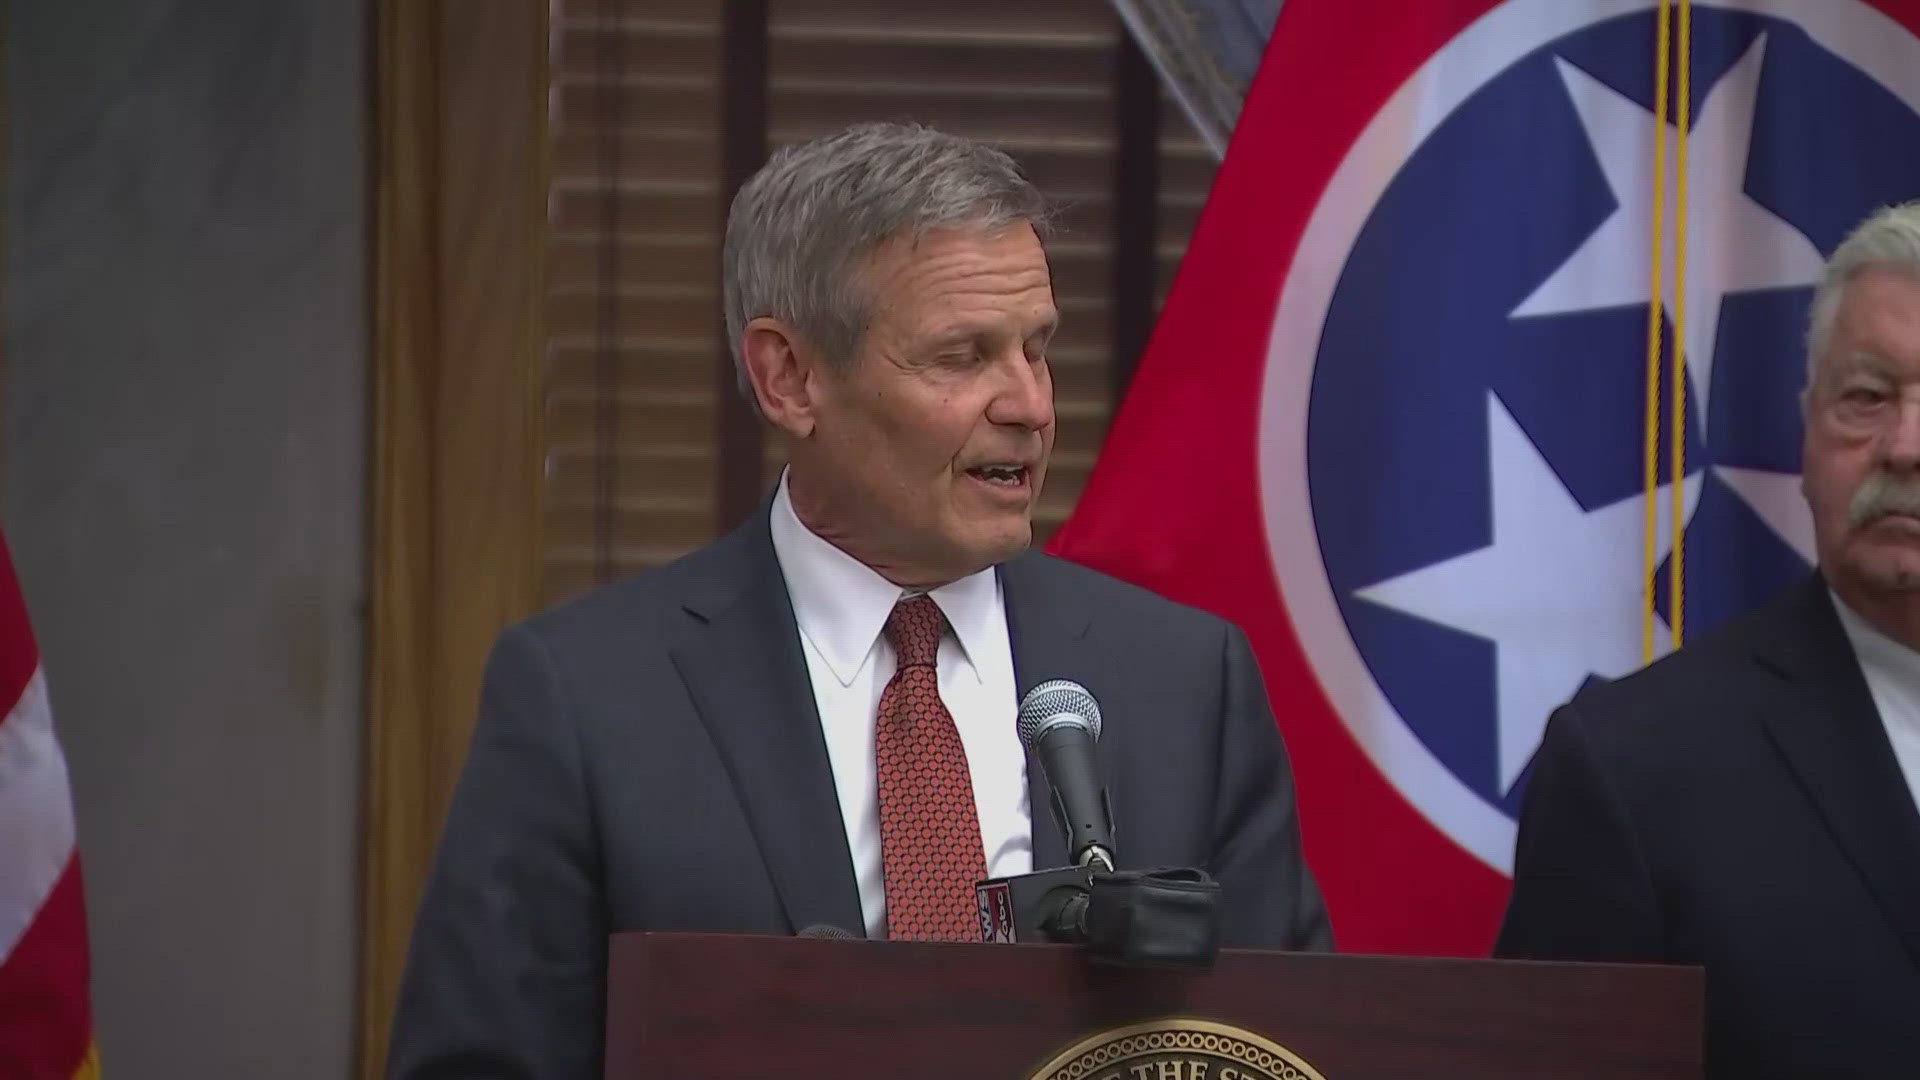 The legislative session ended on April 25, after Gov. Bill Lee failed to see his universal school voucher program passed.